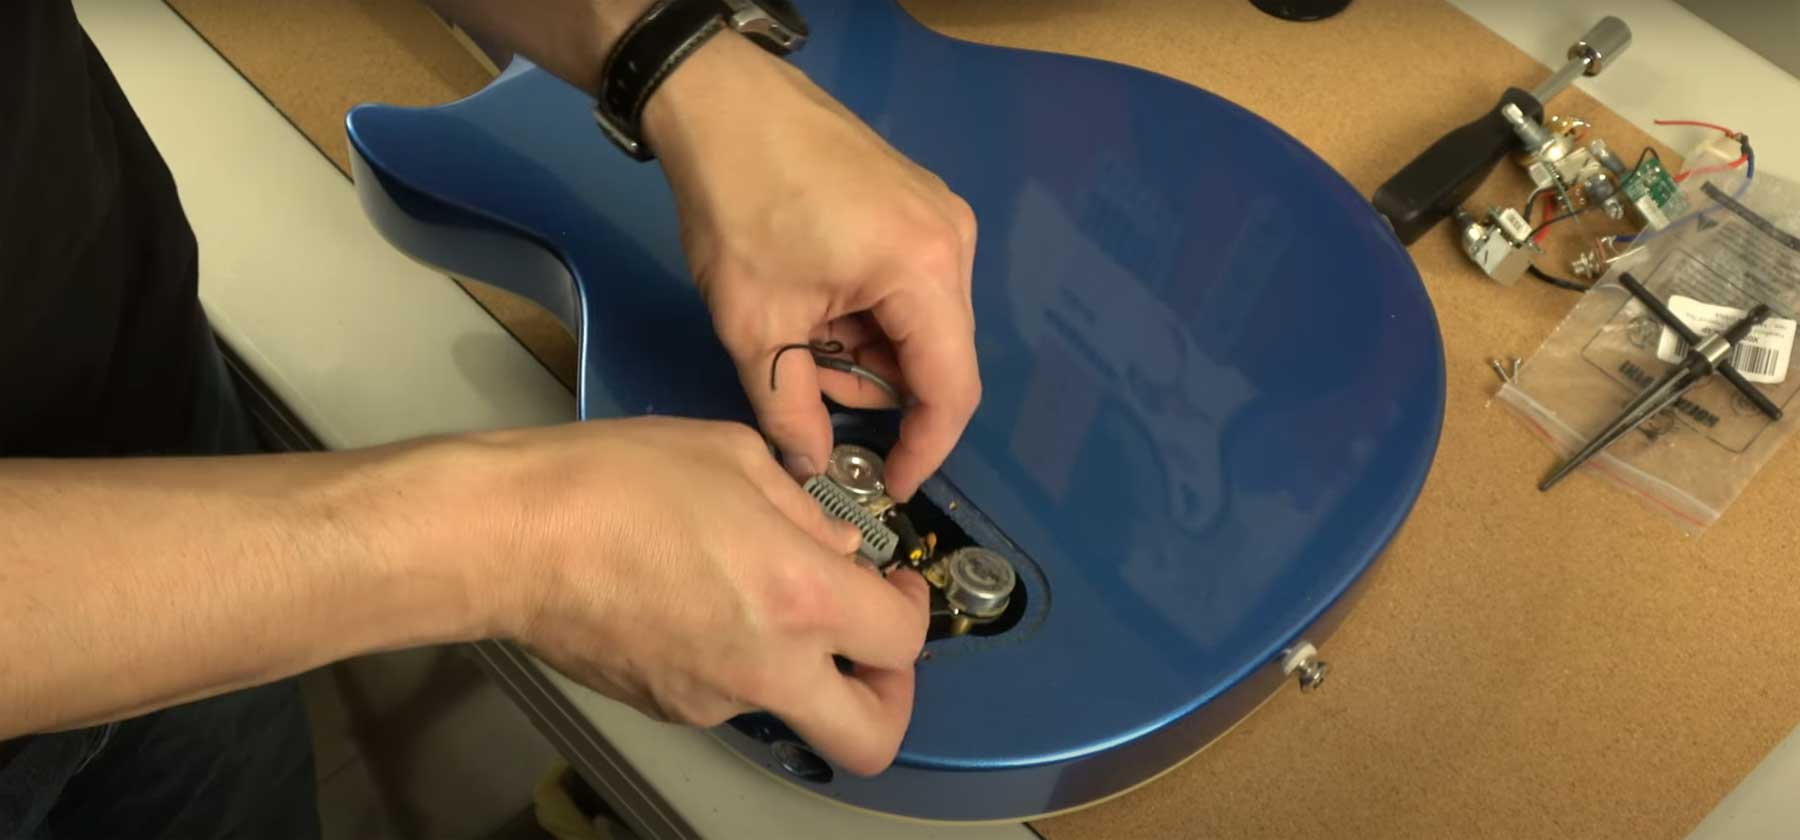 Load video: An install demo showing how to install your ObsidianWire wiring in your Les Paul